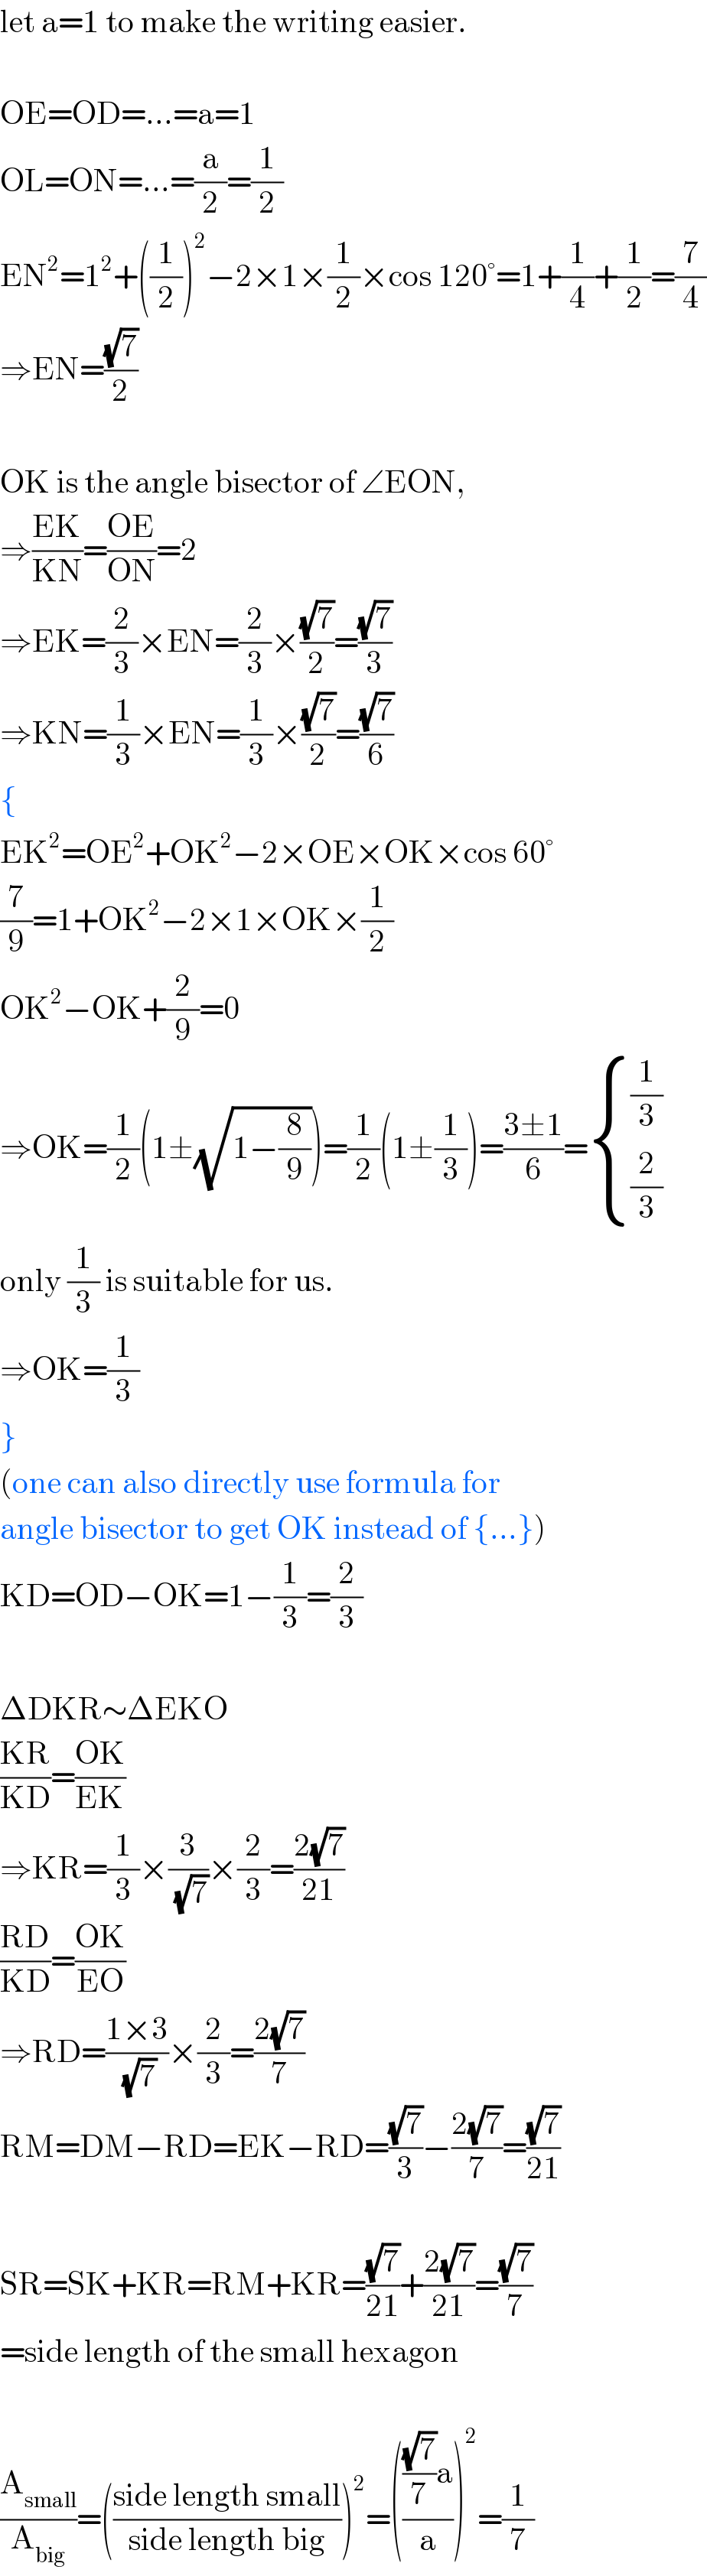 let a=1 to make the writing easier.    OE=OD=...=a=1  OL=ON=...=(a/2)=(1/2)  EN^2 =1^2 +((1/2))^2 −2×1×(1/2)×cos 120°=1+(1/4)+(1/2)=(7/4)  ⇒EN=((√7)/2)    OK is the angle bisector of ∠EON,  ⇒((EK)/(KN))=((OE)/(ON))=2  ⇒EK=(2/3)×EN=(2/3)×((√7)/2)=((√7)/3)  ⇒KN=(1/3)×EN=(1/3)×((√7)/2)=((√7)/6)  {  EK^2 =OE^2 +OK^2 −2×OE×OK×cos 60°  (7/9)=1+OK^2 −2×1×OK×(1/2)  OK^2 −OK+(2/9)=0  ⇒OK=(1/2)(1±(√(1−(8/9))))=(1/2)(1±(1/3))=((3±1)/6)= { ((1/3)),((2/3)) :}  only (1/3) is suitable for us.  ⇒OK=(1/3)  }  (one can also directly use formula for  angle bisector to get OK instead of {...})  KD=OD−OK=1−(1/3)=(2/3)    ΔDKR∼ΔEKO  ((KR)/(KD))=((OK)/(EK))  ⇒KR=(1/3)×(3/(√7))×(2/3)=((2(√7))/(21))  ((RD)/(KD))=((OK)/(EO))  ⇒RD=((1×3)/(√7))×(2/3)=((2(√7))/7)  RM=DM−RD=EK−RD=((√7)/3)−((2(√7))/7)=((√7)/(21))    SR=SK+KR=RM+KR=((√7)/(21))+((2(√7))/(21))=((√7)/7)  =side length of the small hexagon    (A_(small) /A_(big) )=(((side length small)/(side length big)))^2 =(((((√7)/7)a)/a))^2 =(1/7)  